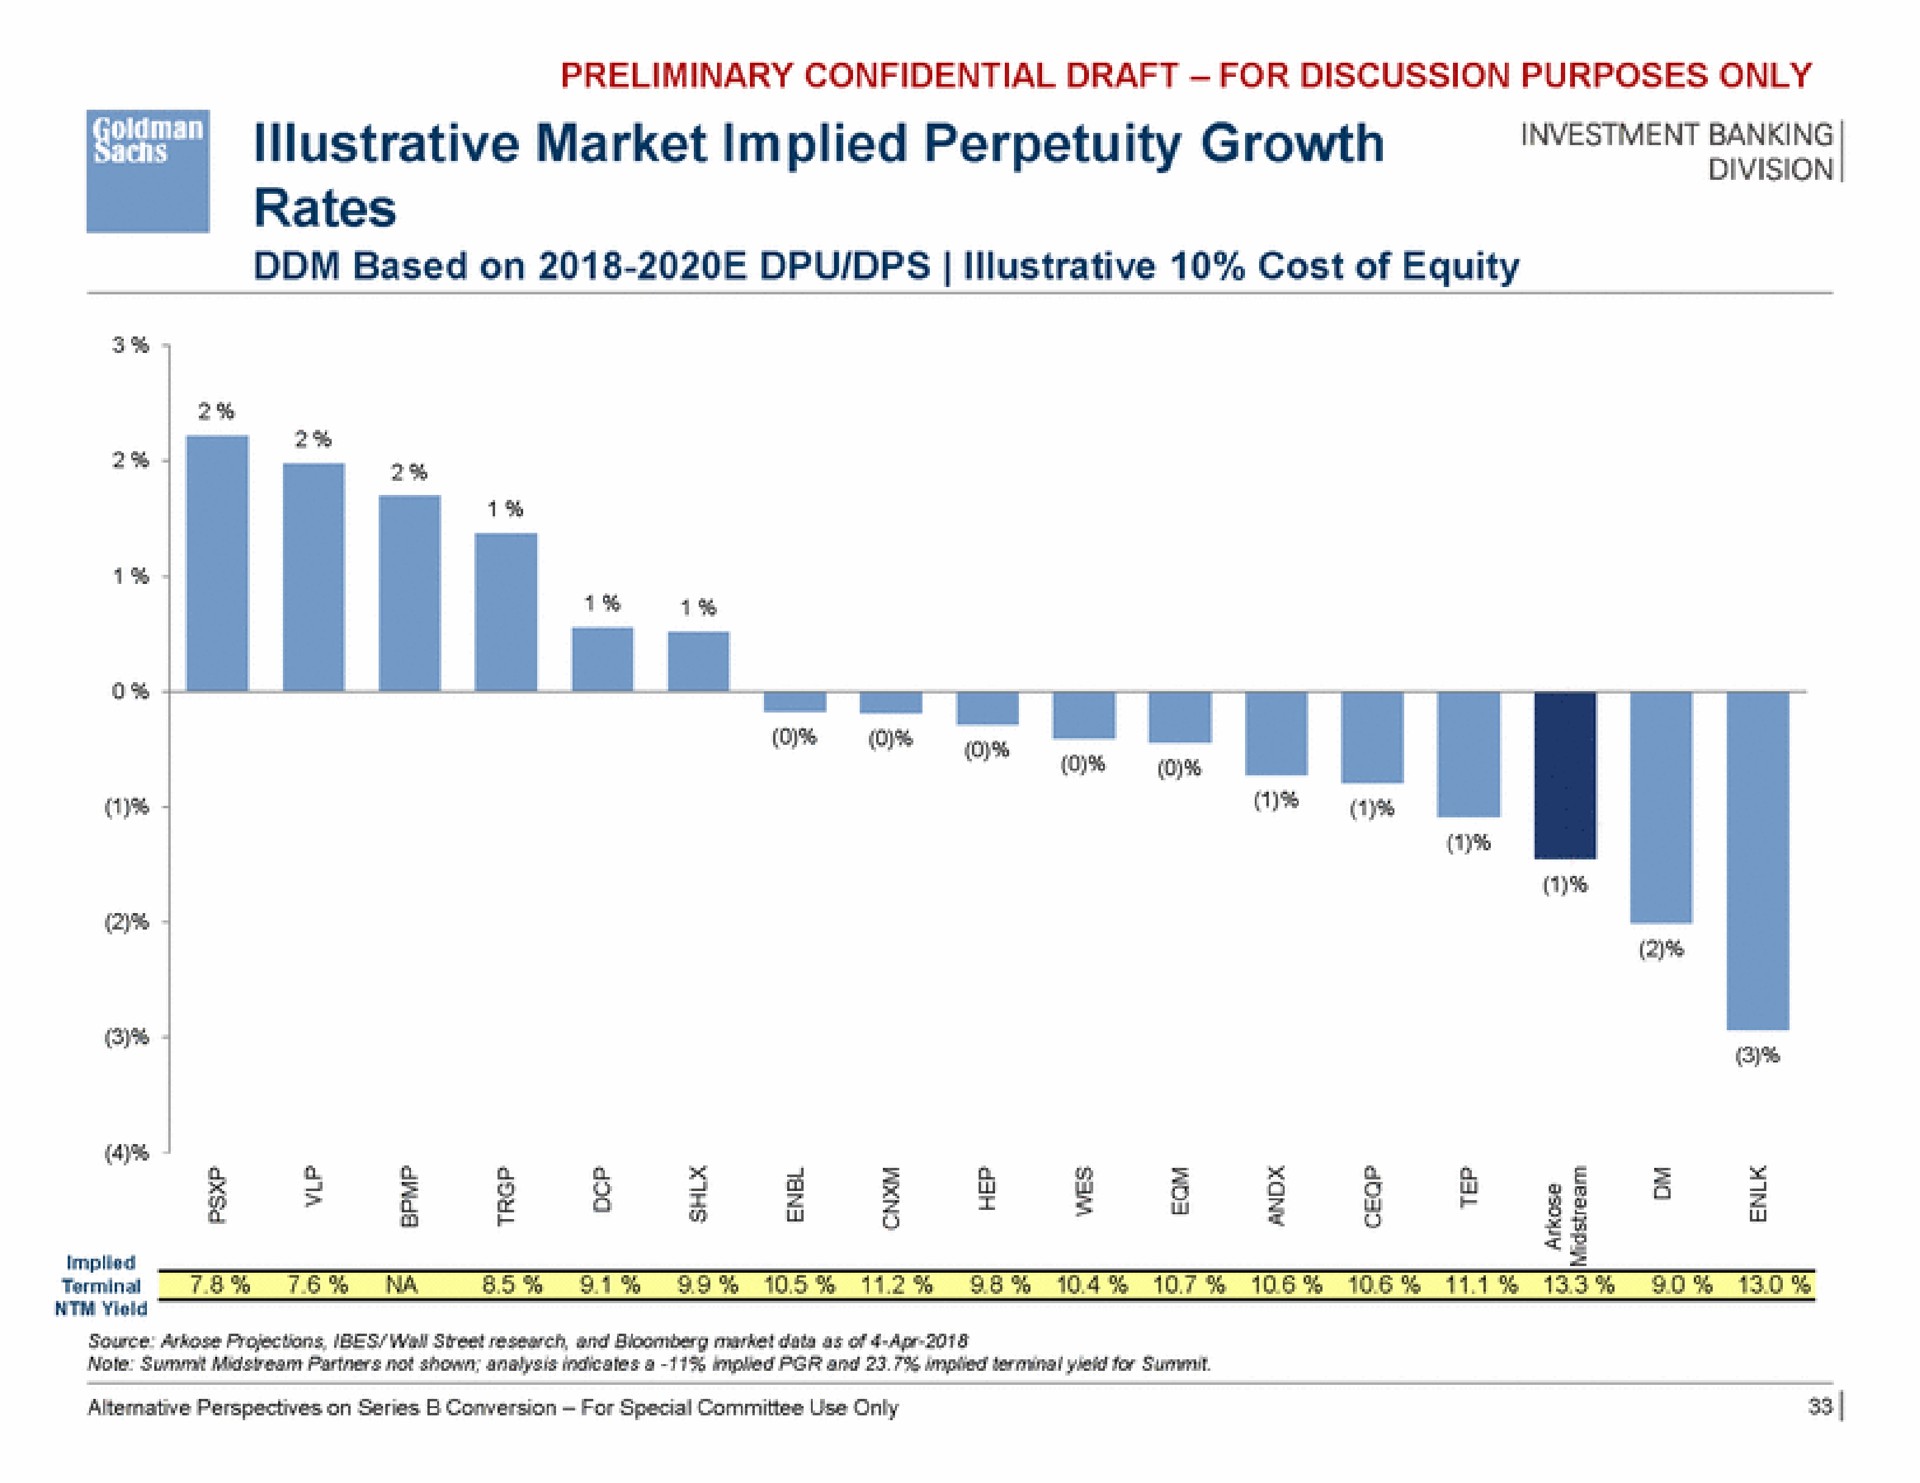 illustrative market implied perpetuity growth rates based on illustrative cost of equity | Goldman Sachs